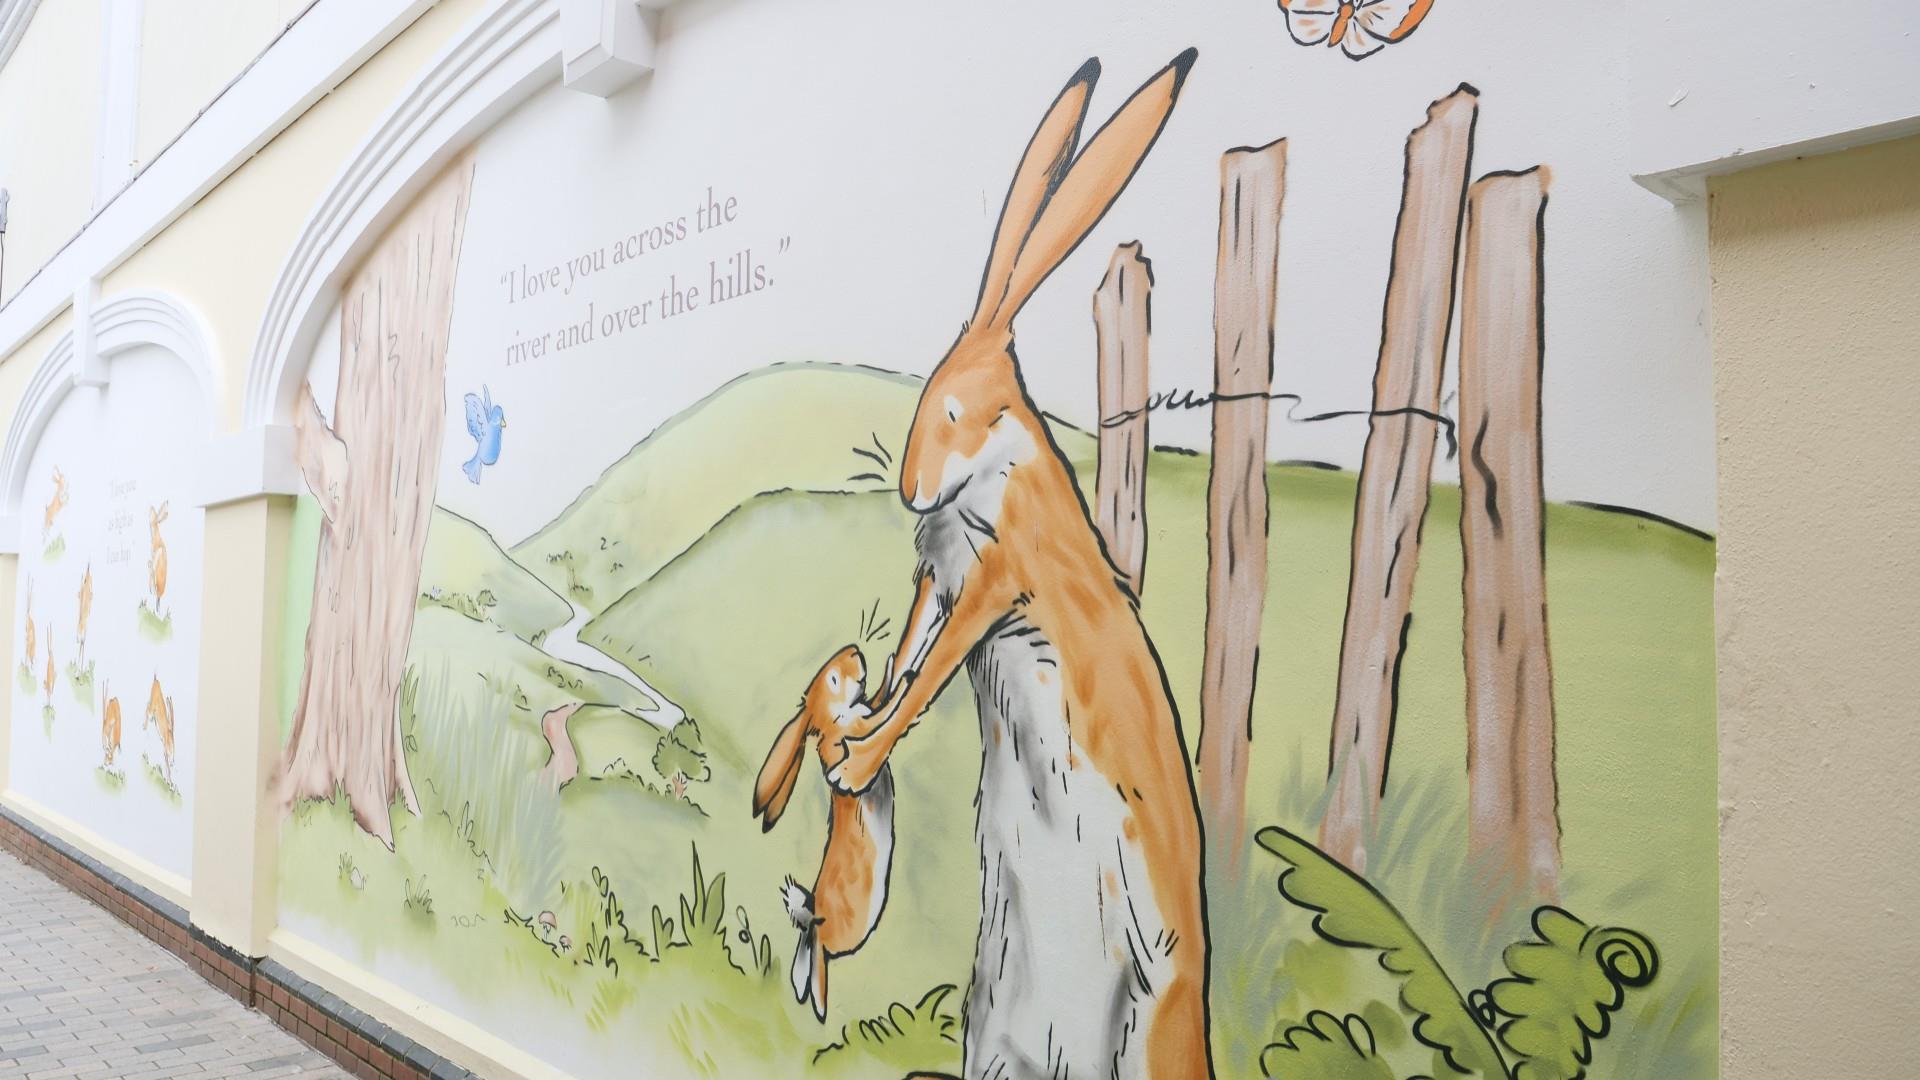 Picture is of murals of little nutbrown hare and big nutbrown hair in Haslem's Lane, Lisburn